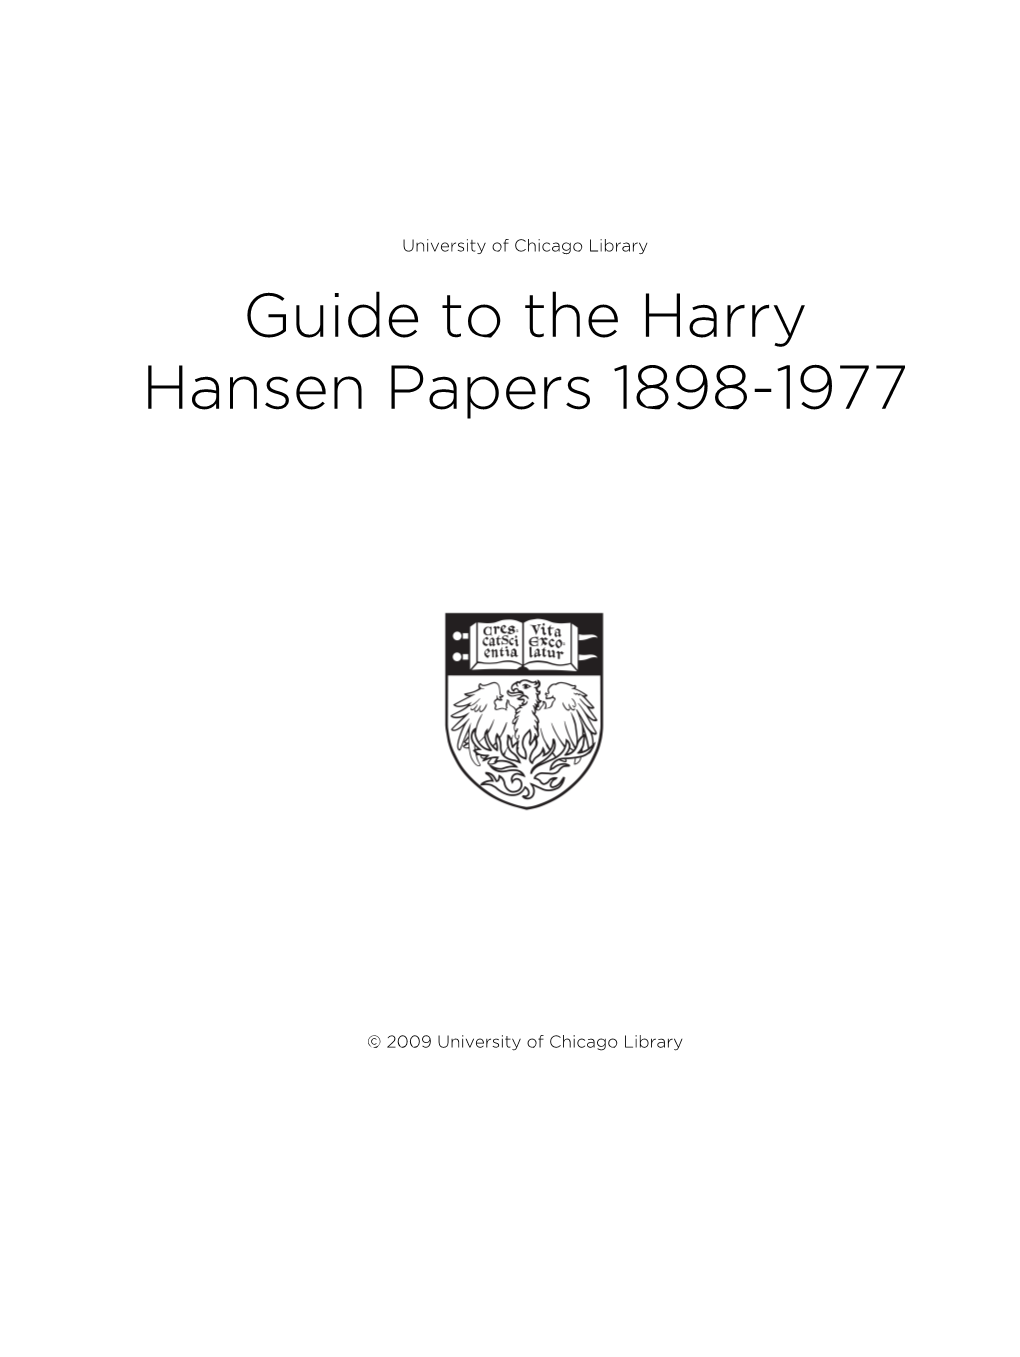 Guide to the Harry Hansen Papers 1898-1977